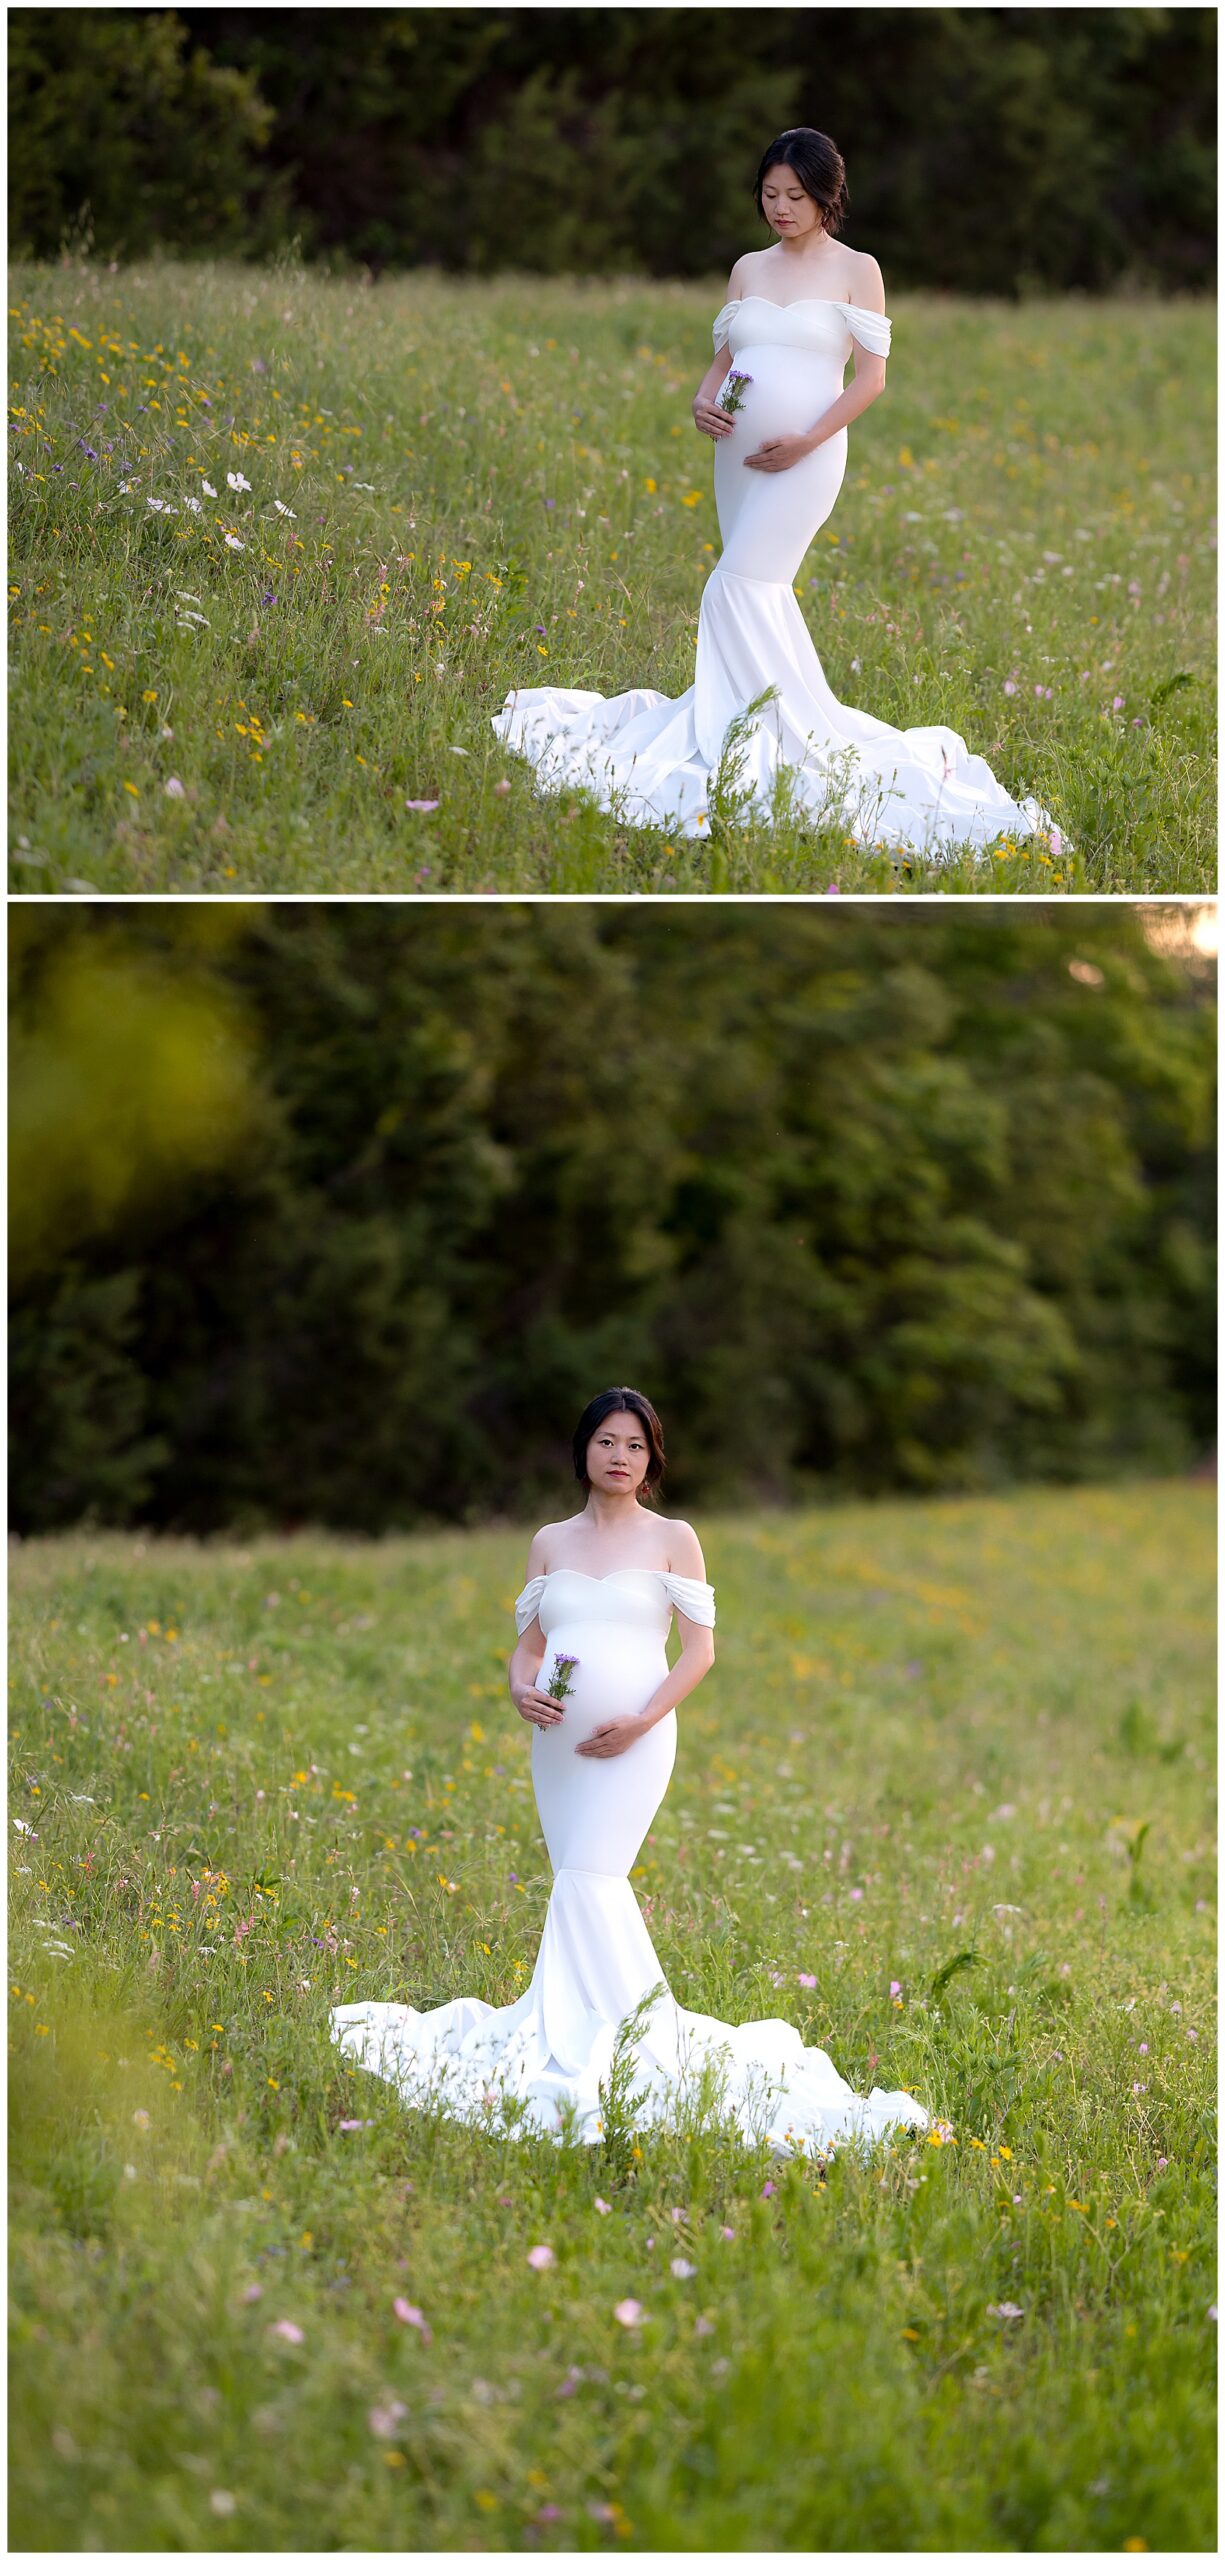 Brushy creek maternity photos featuring a pregnant woman in a white maternity gown standing in a field of wildflowers